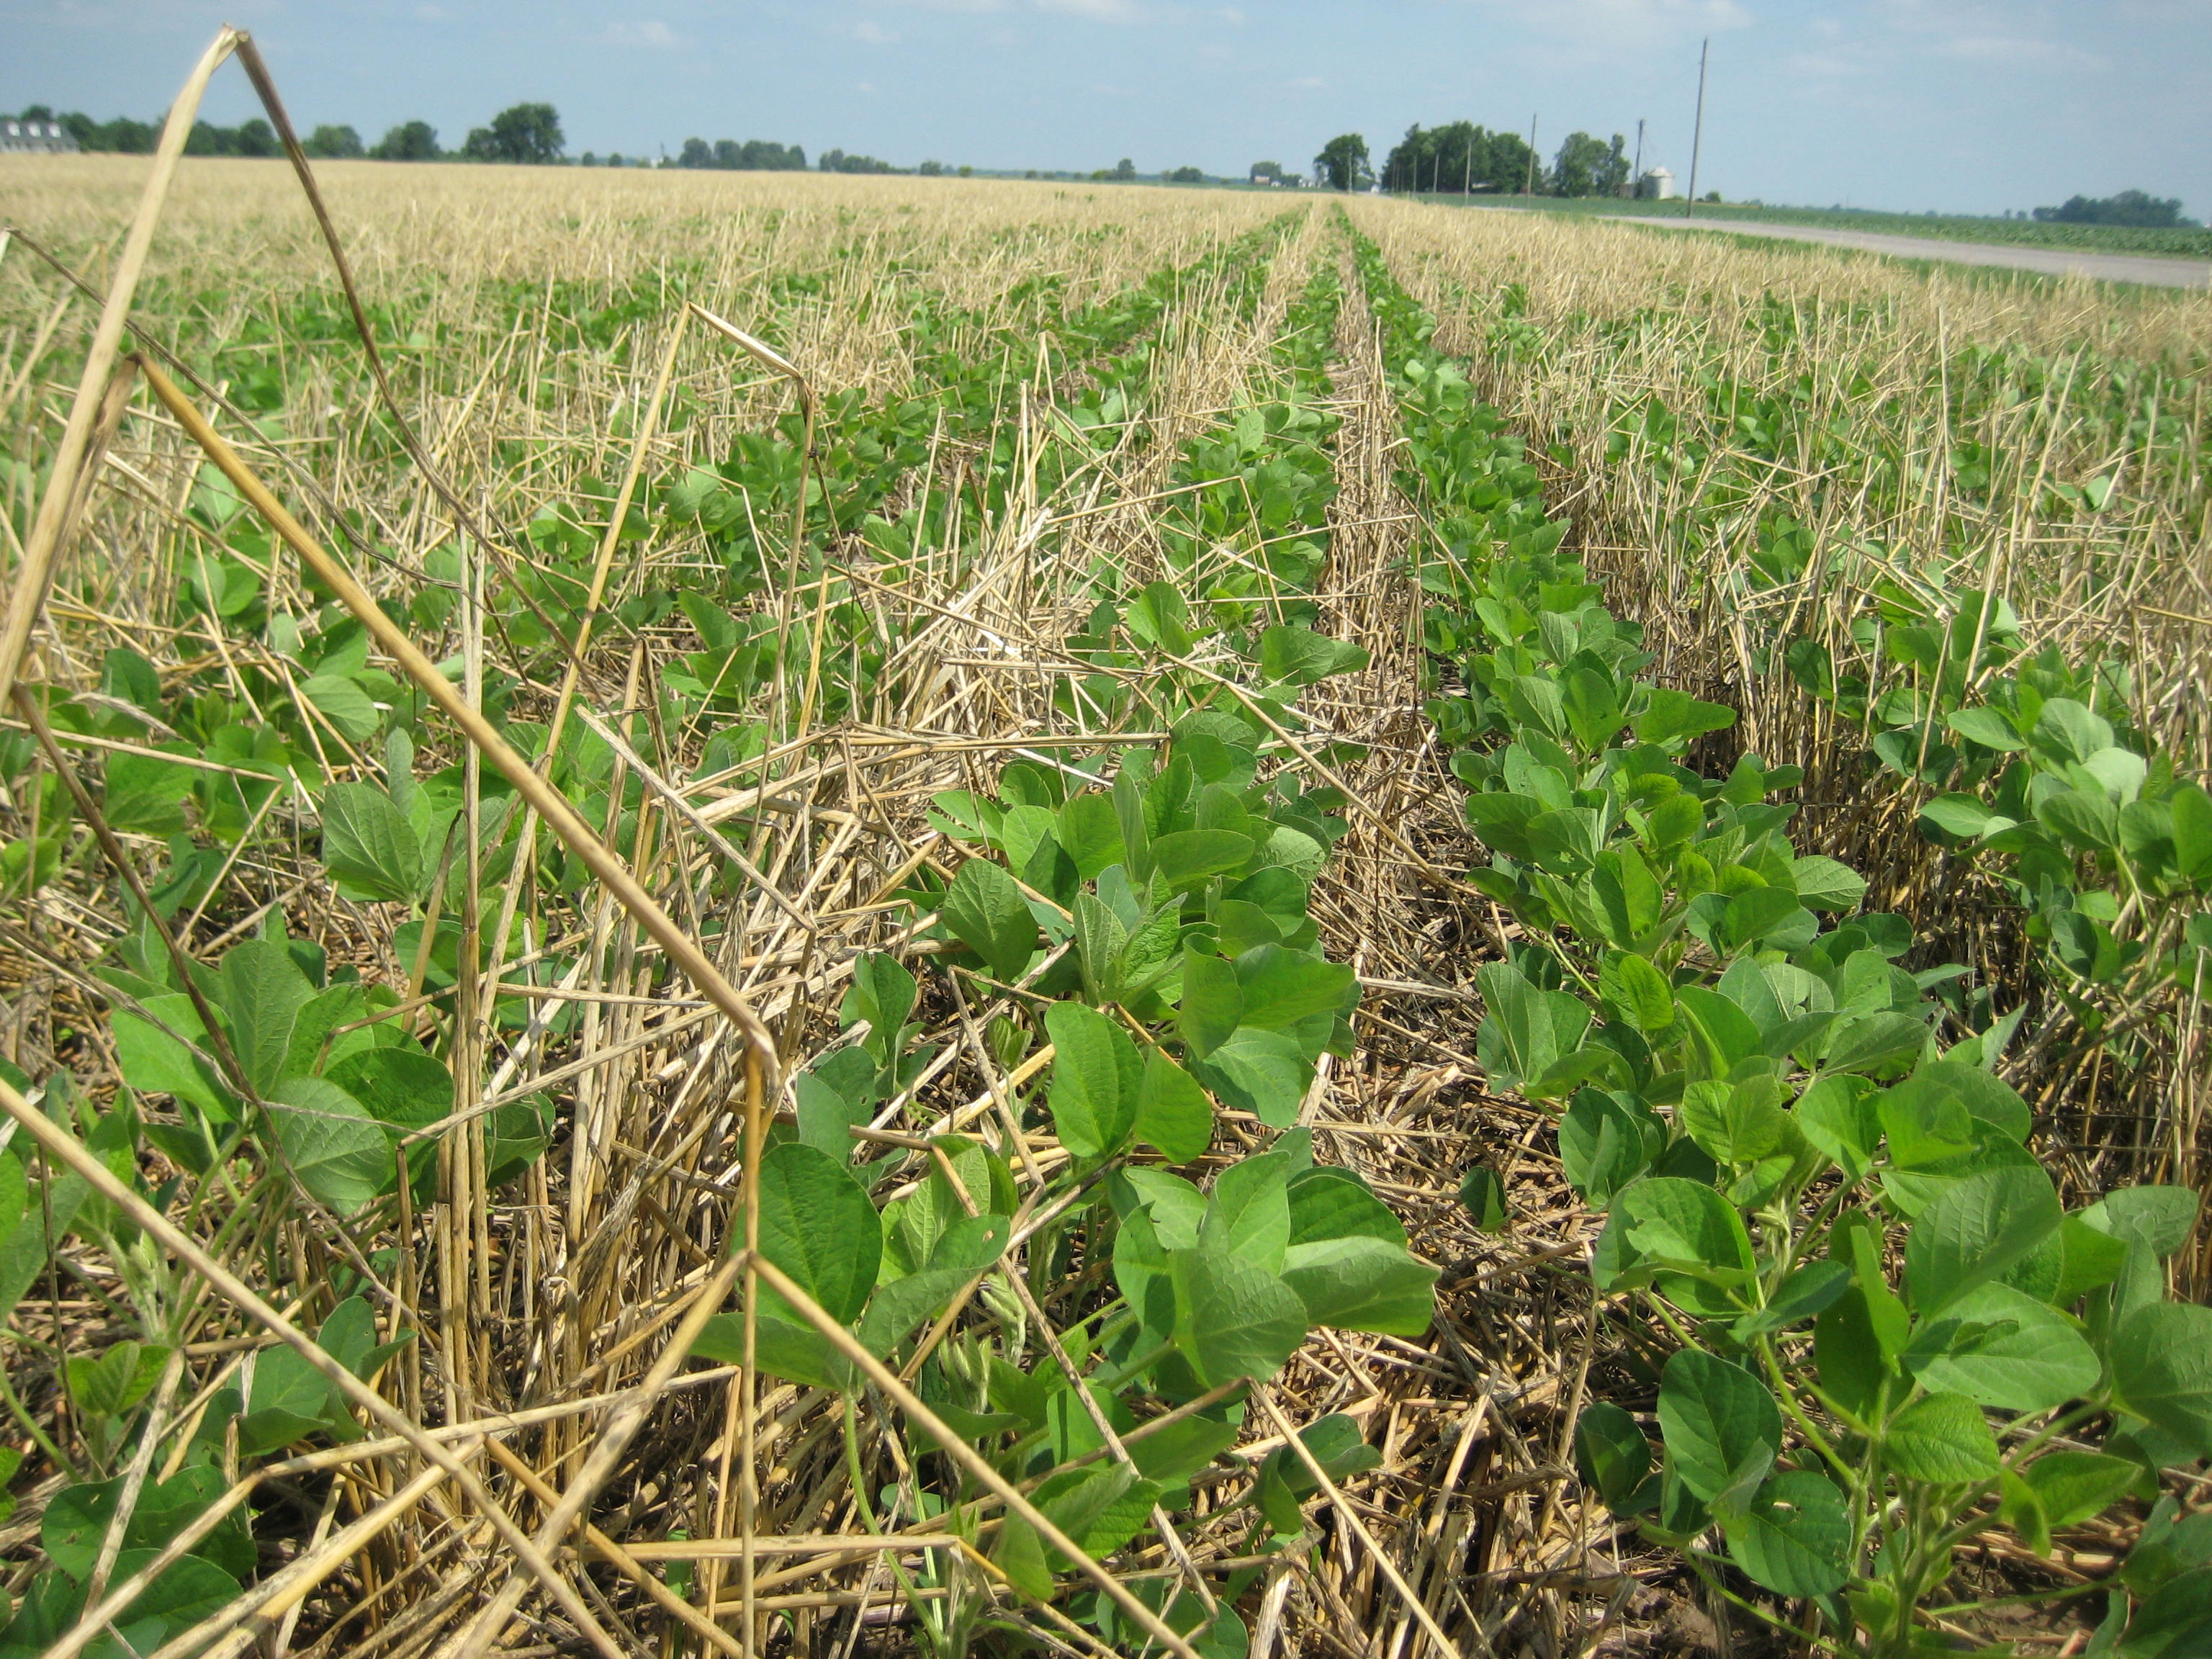 State Conservationist Quarterbacks Cover Crop Pilot to Keep Farmers Compliant with NRCS Programs